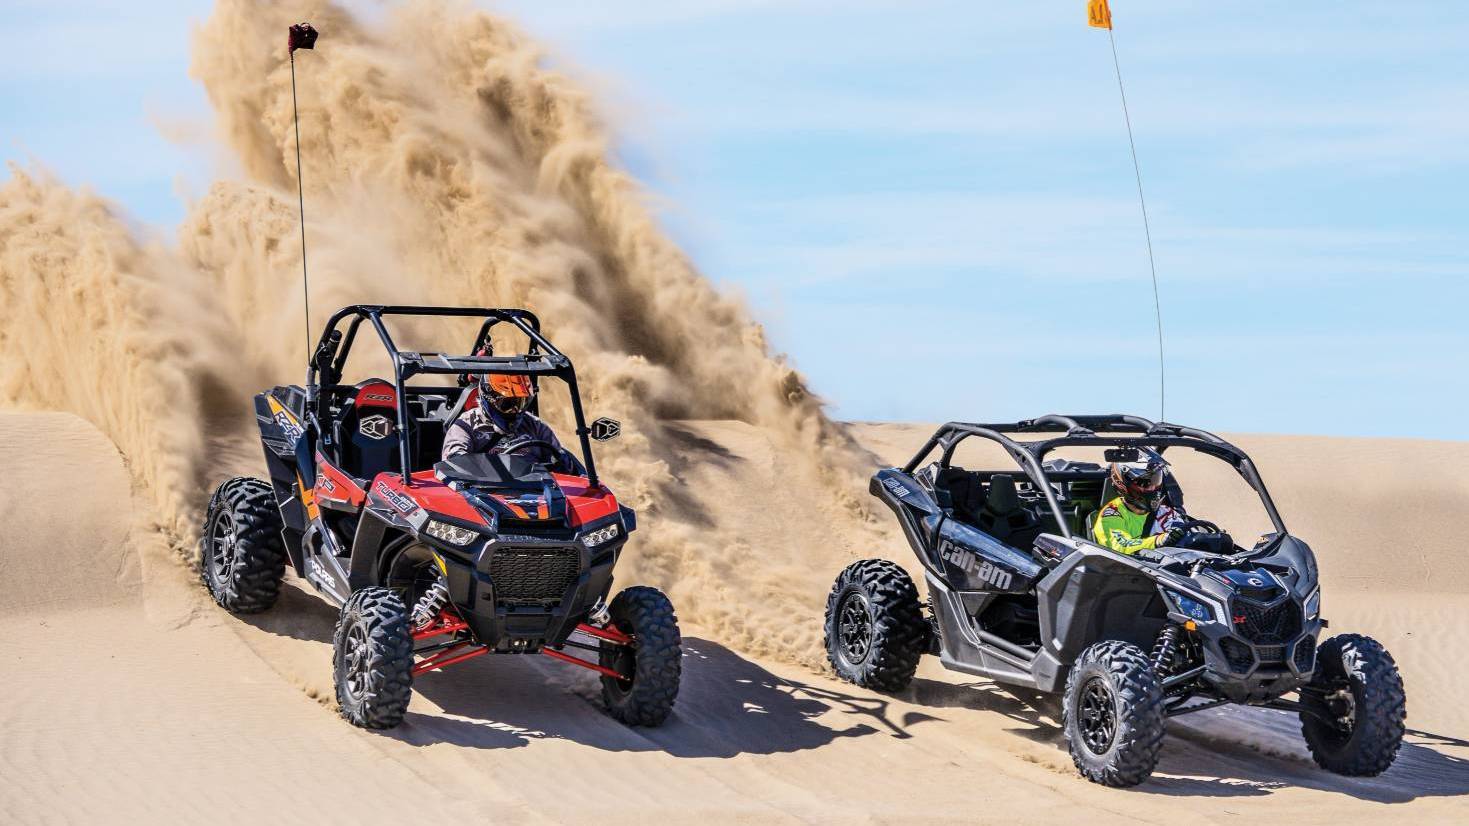 Dune Buggy self drive 1000cc for 2 hours (1 or 2 Seaters)